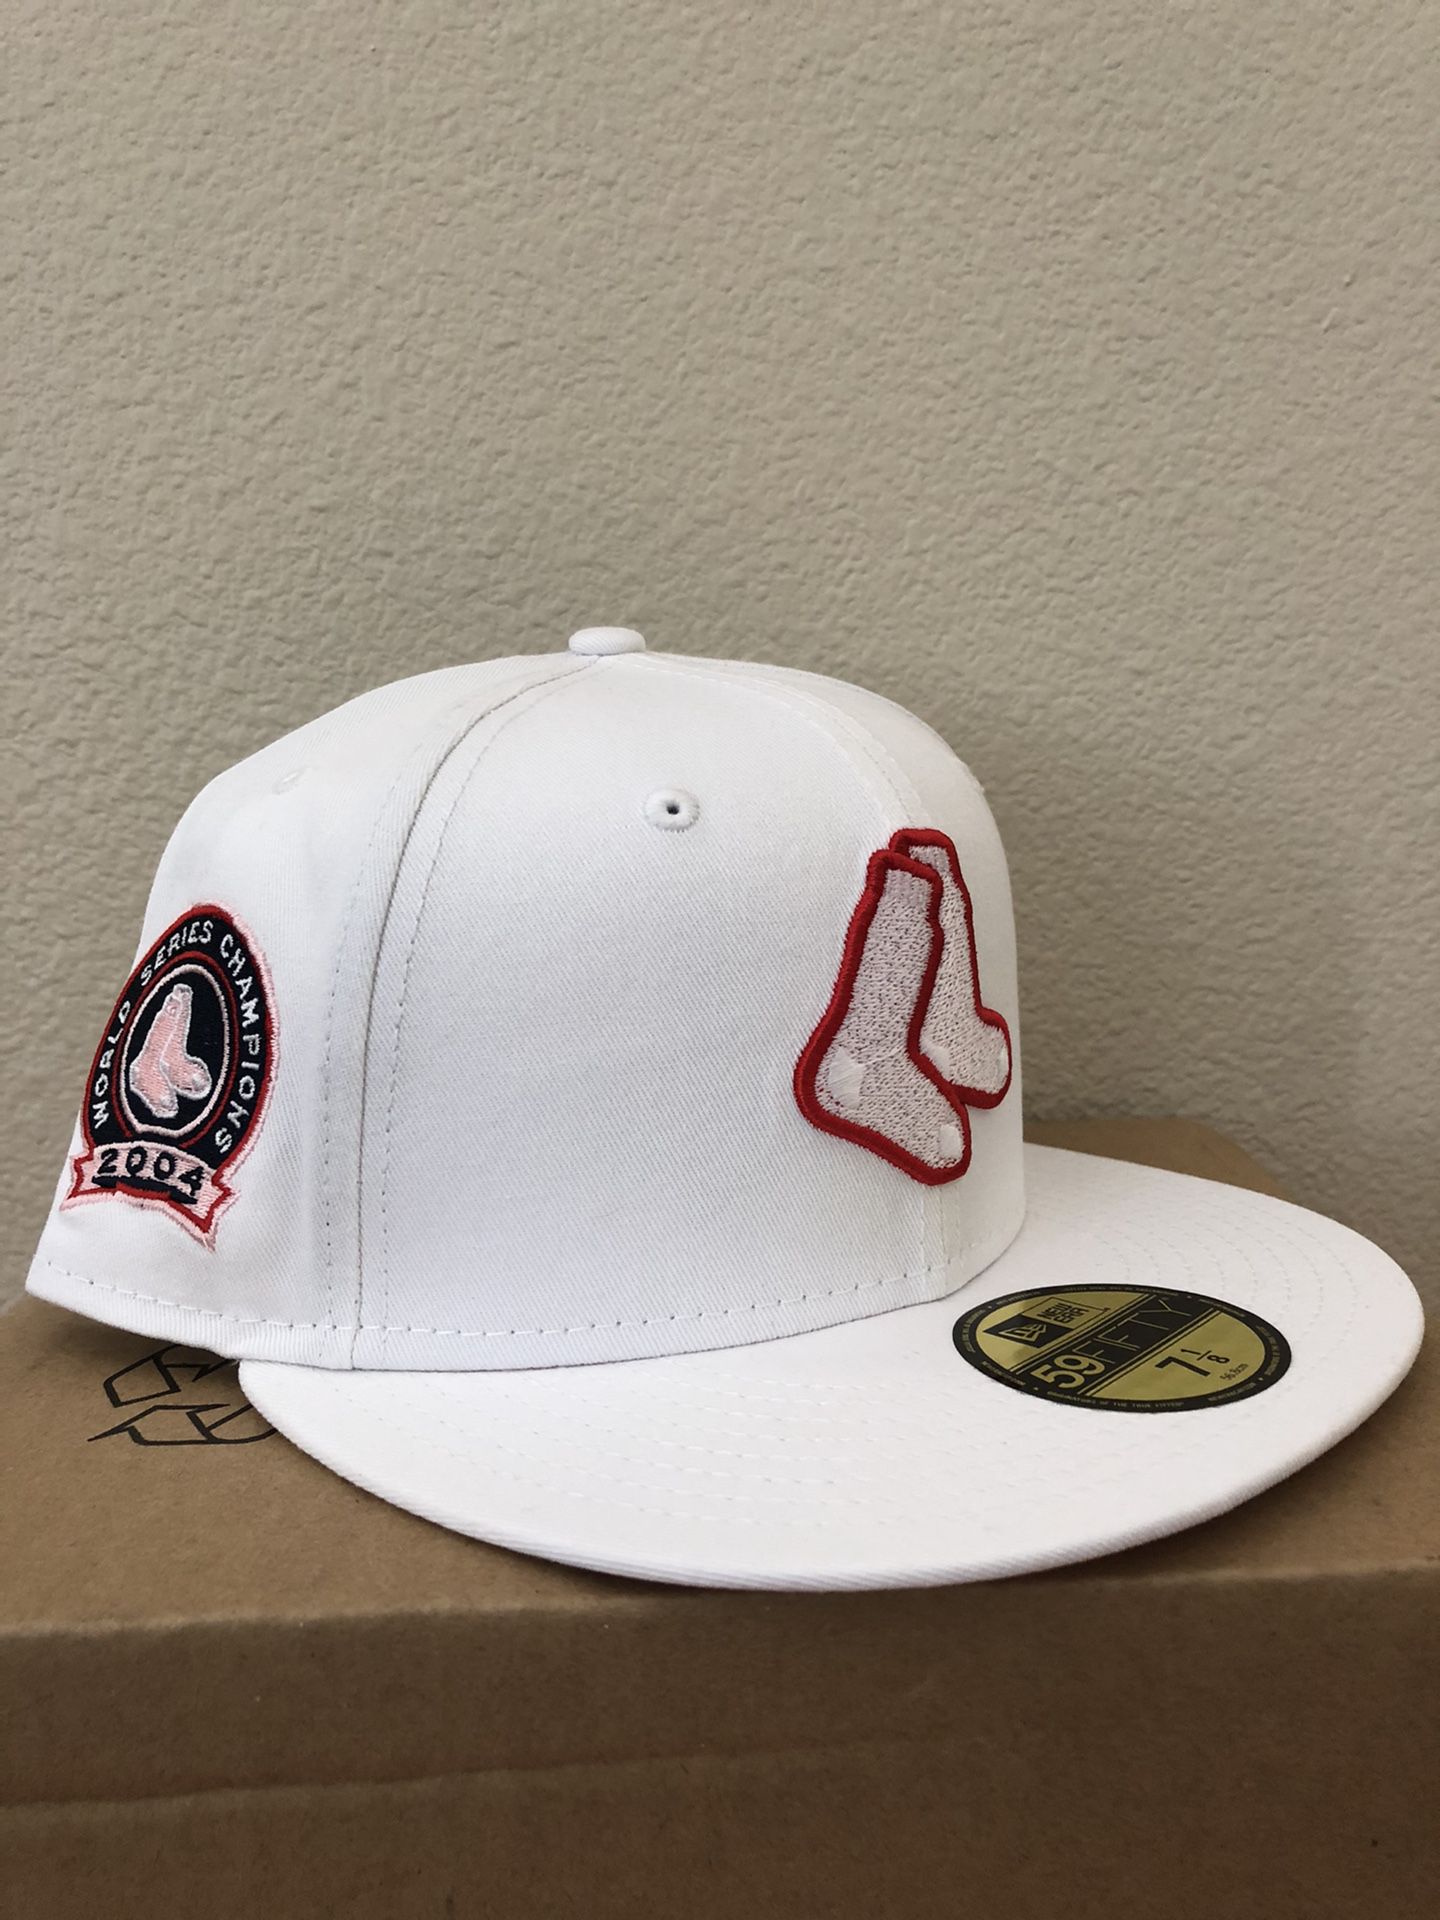 Sports World165 BOSTON RED SOX 2004 WORLD SERIES CHAMPIONS SNOW WHITE  COLLECTION PINK BRIM NEW ERA FITTED HAT for Sale in Murrieta, CA - OfferUp